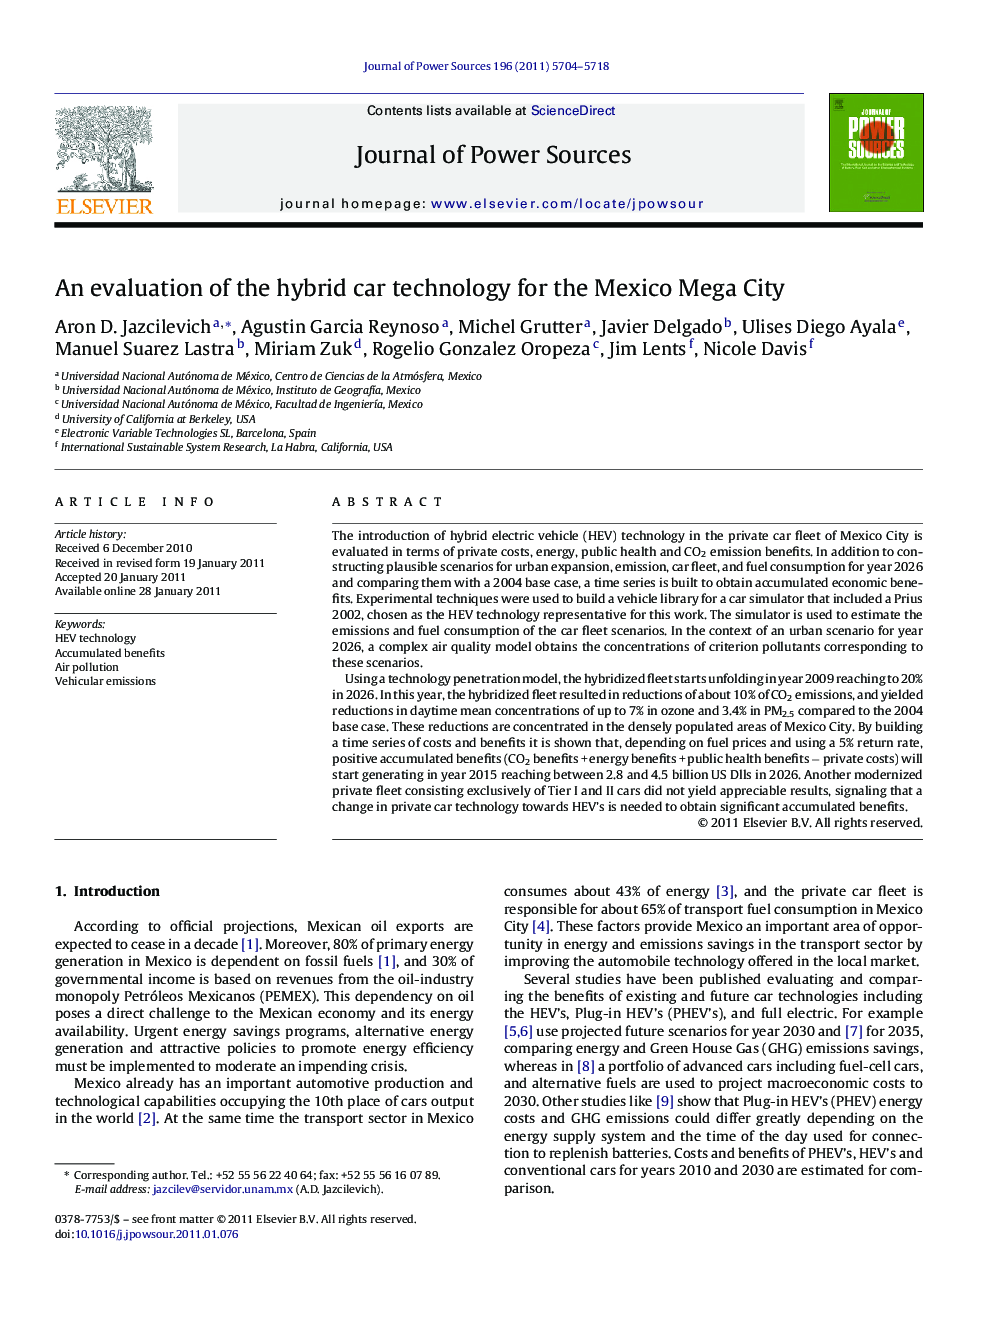 An evaluation of the hybrid car technology for the Mexico Mega City